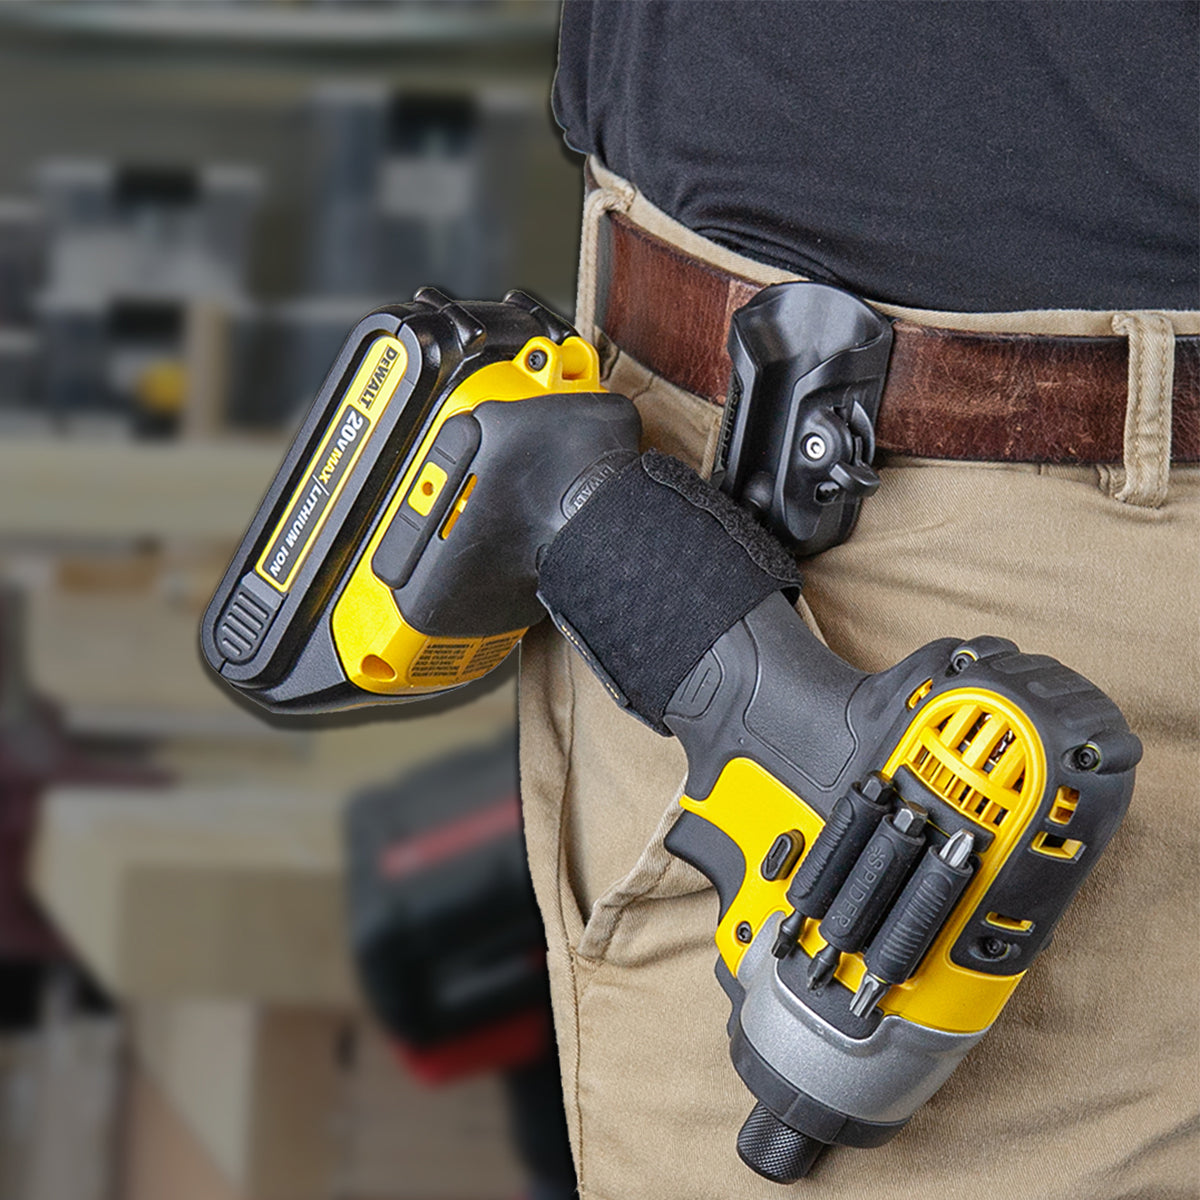 Spider Tool Holster - Improve The Way You Carry Your Power Drill, Driver,  Multitool, Pneumatic, Multi-Tool and More on Your Belt - Compatible with  All